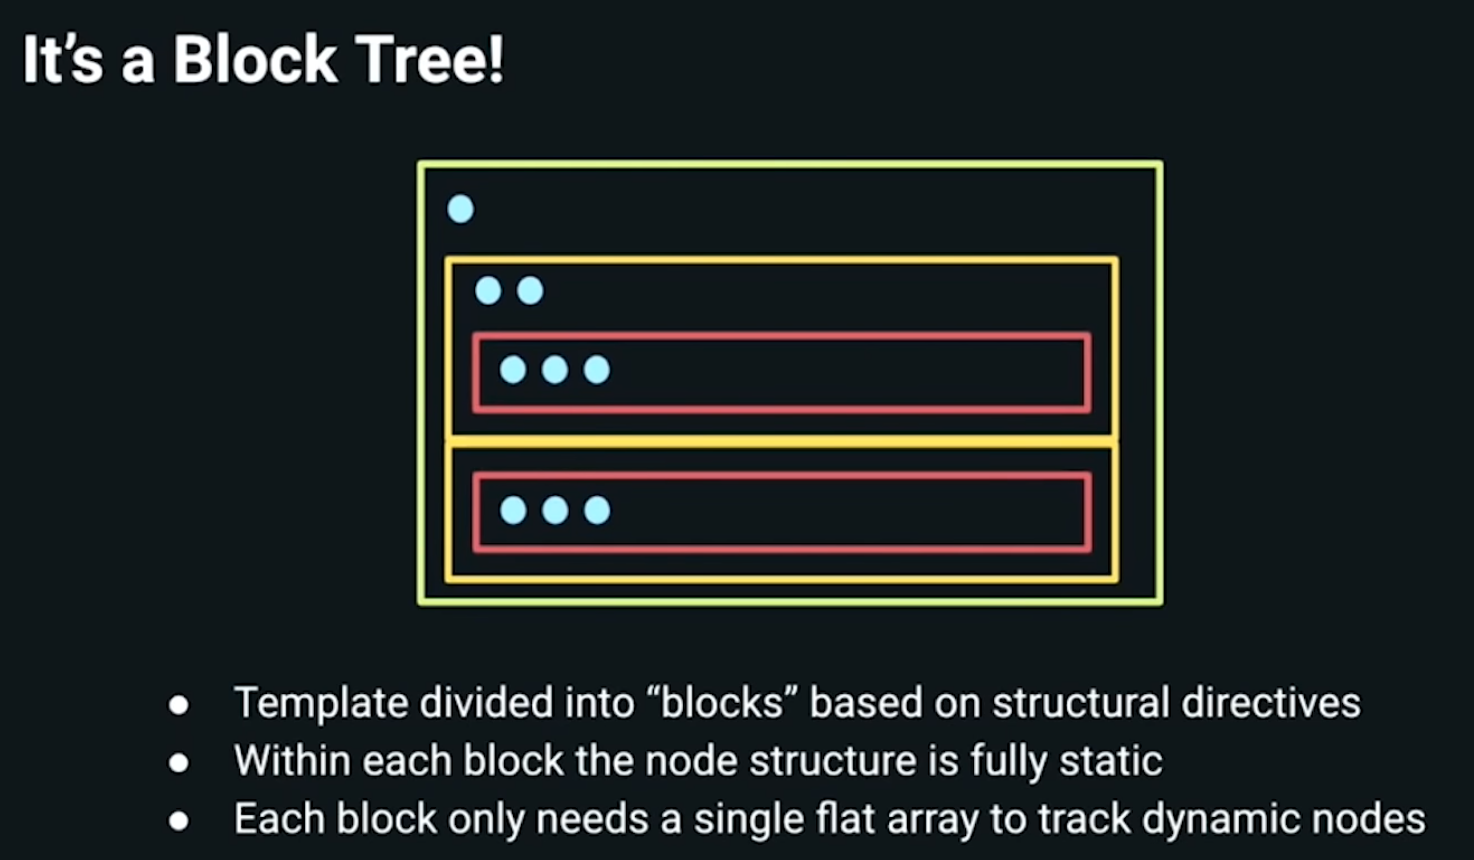 The template is divided into blocks based on structure. Within each block the node structure is fully static. Each block only needs a single flat array to track dynamic nodes.